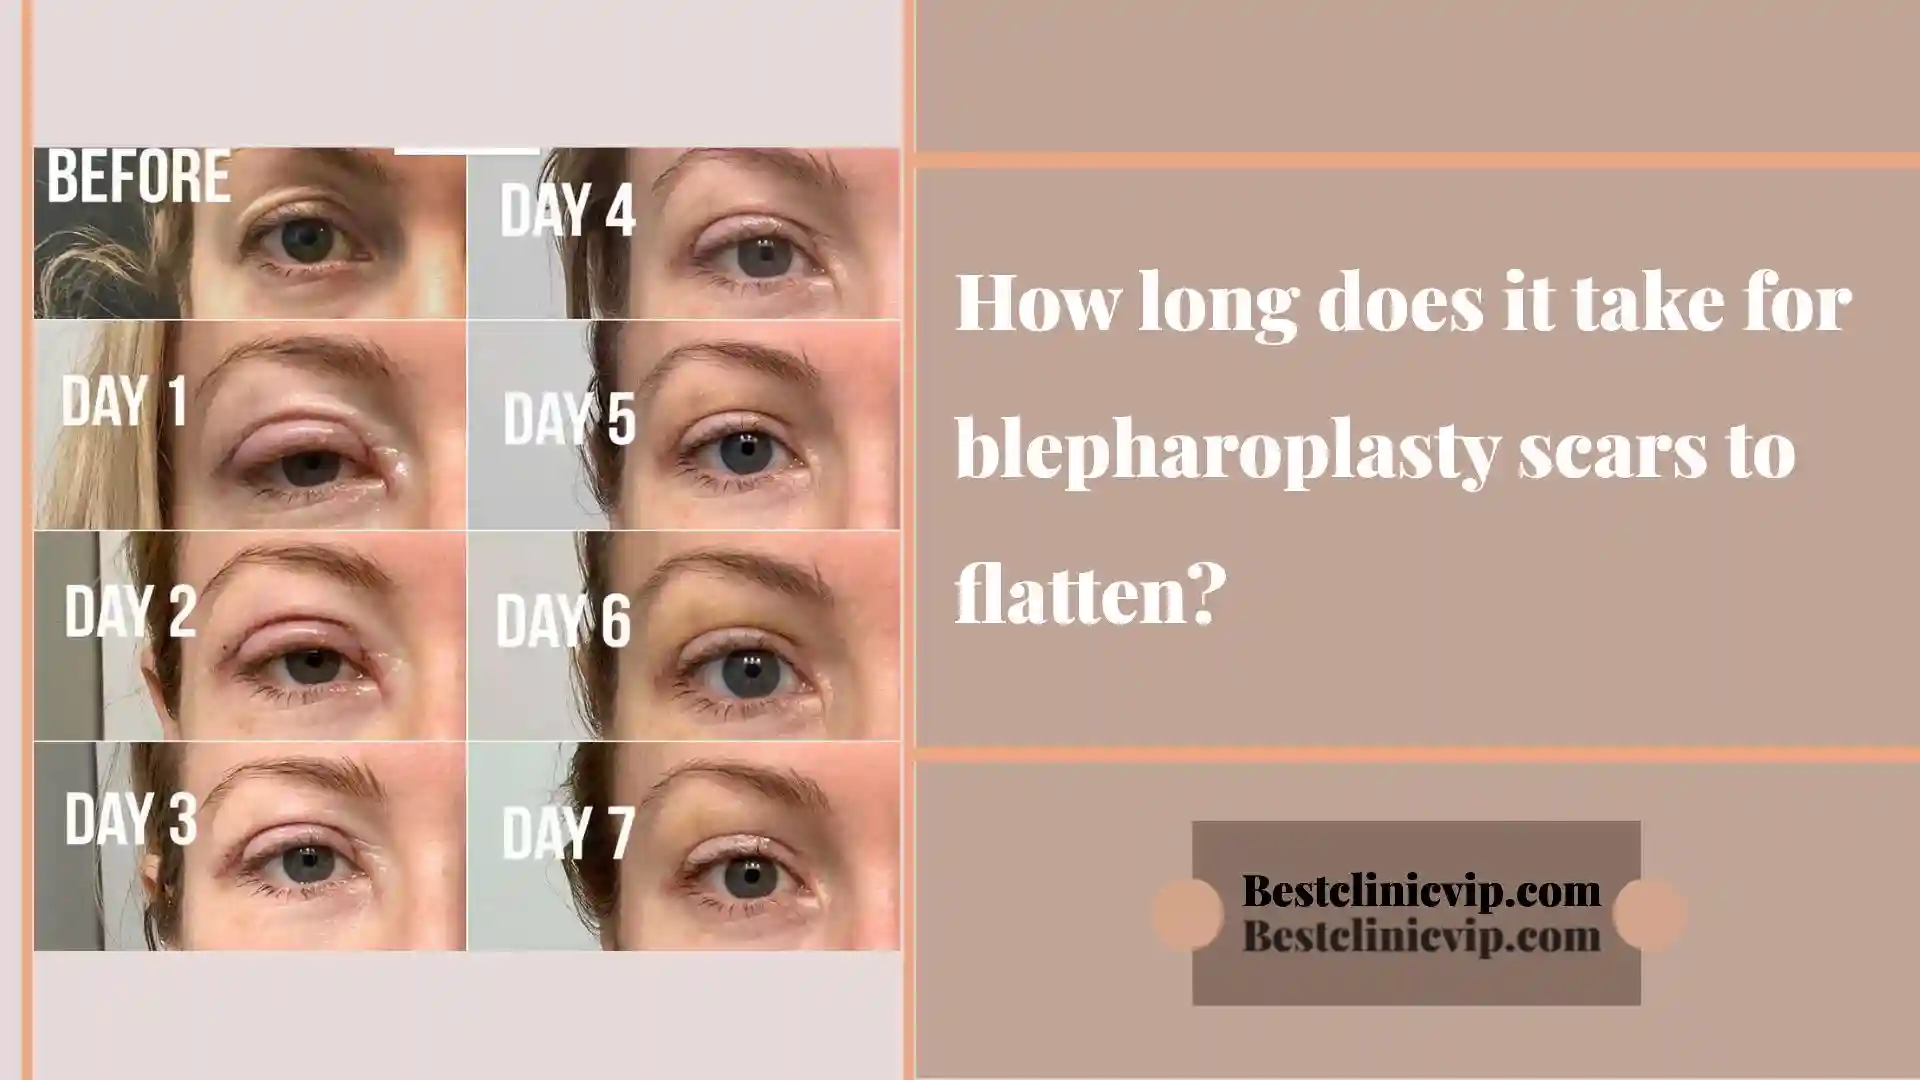 How long does it take for blepharoplasty scars to flatten?